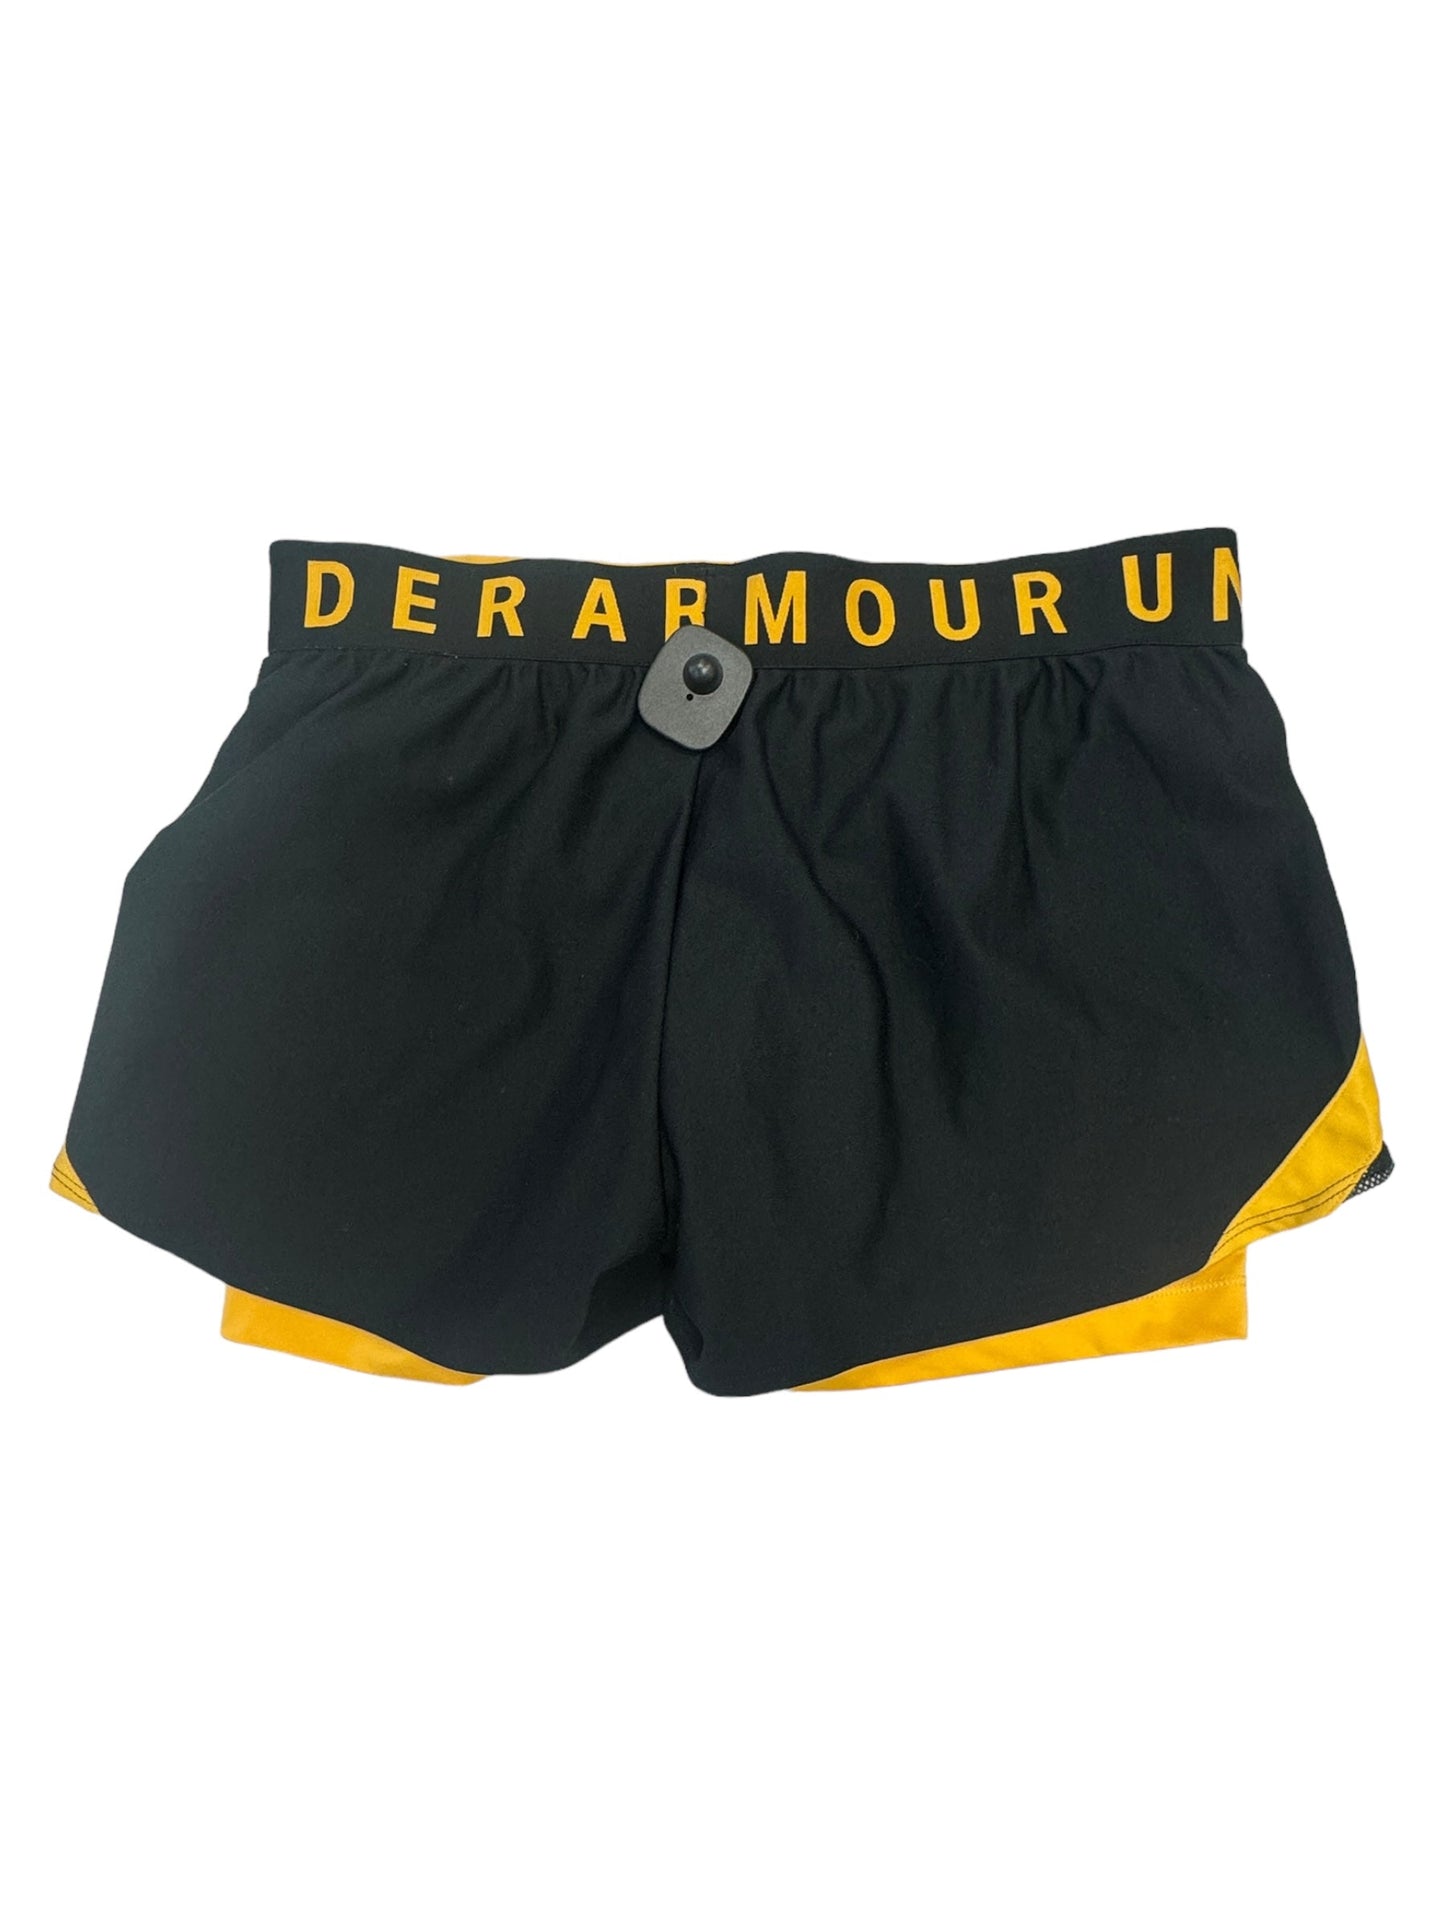 Black & Yellow Athletic Shorts Under Armour, Size L